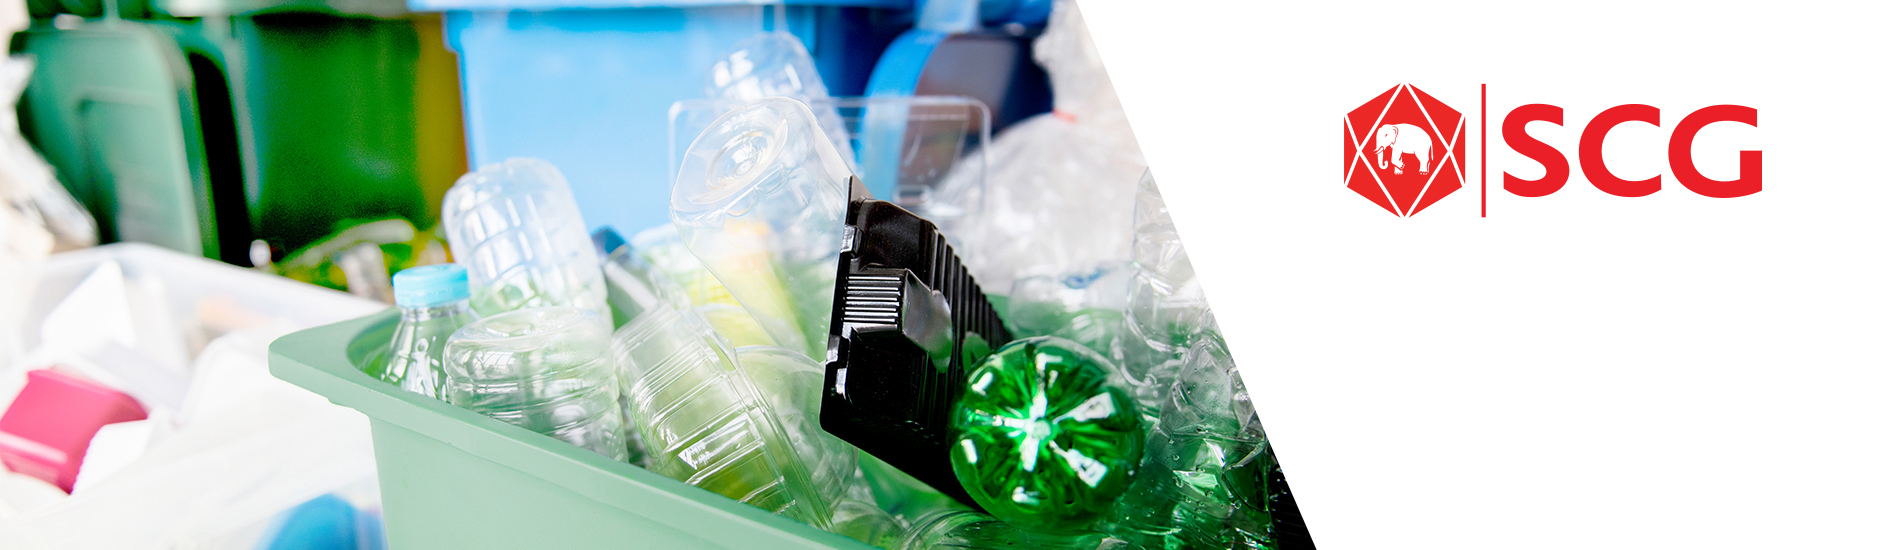 Three Challenges to Overcome for Successful Recycling with SCG